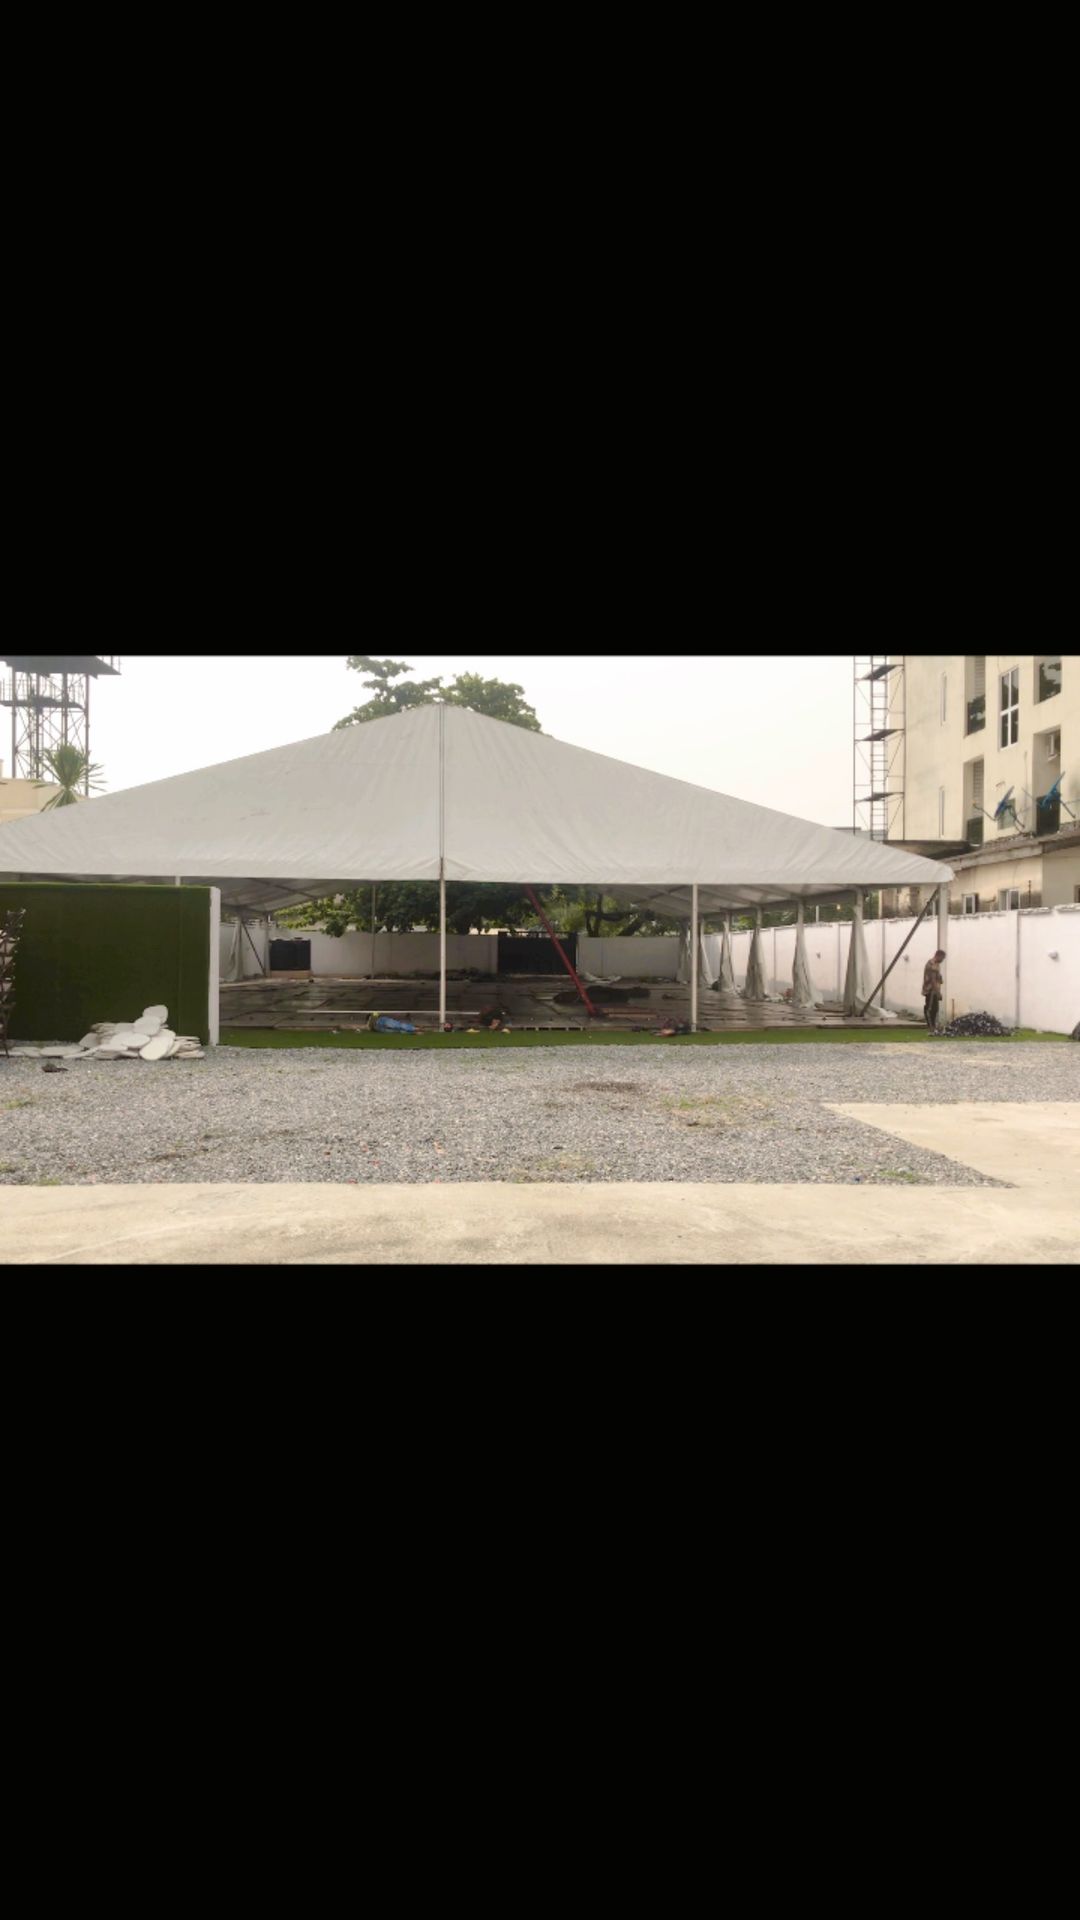 268465904 441831064241644 7566468756962779624 n - Set up of a 20m by 30m marquee tent by @naphtalieventsandrentals...